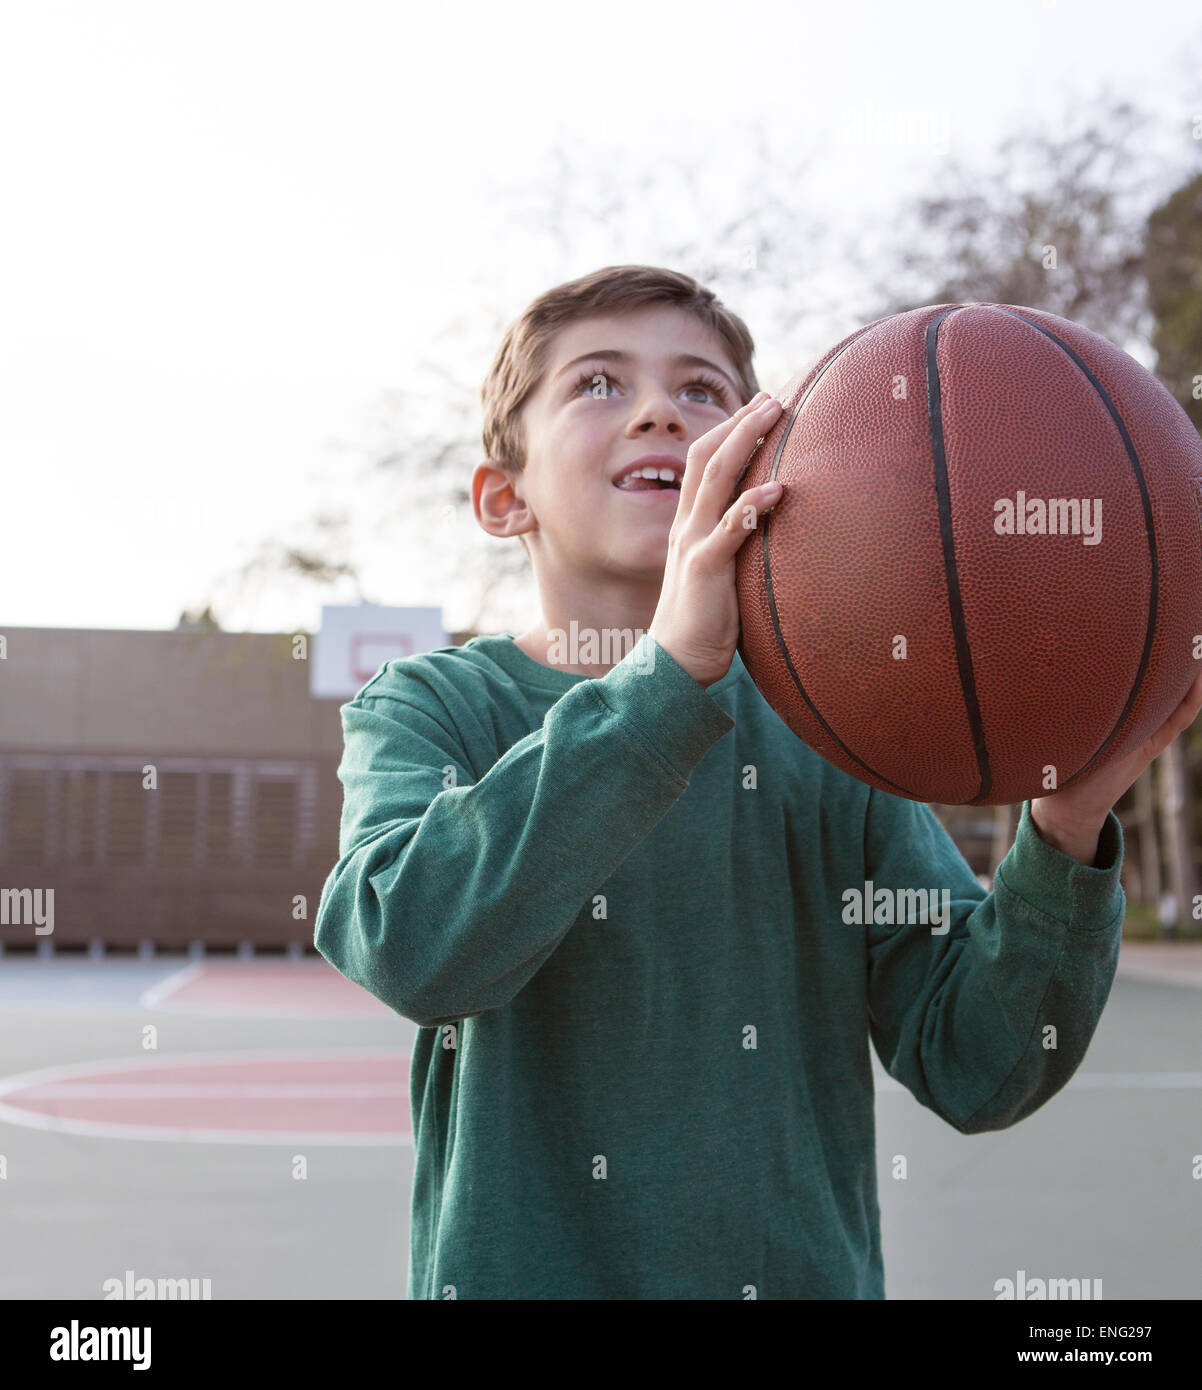 Caucasian boy holding basketball on court Banque D'Images